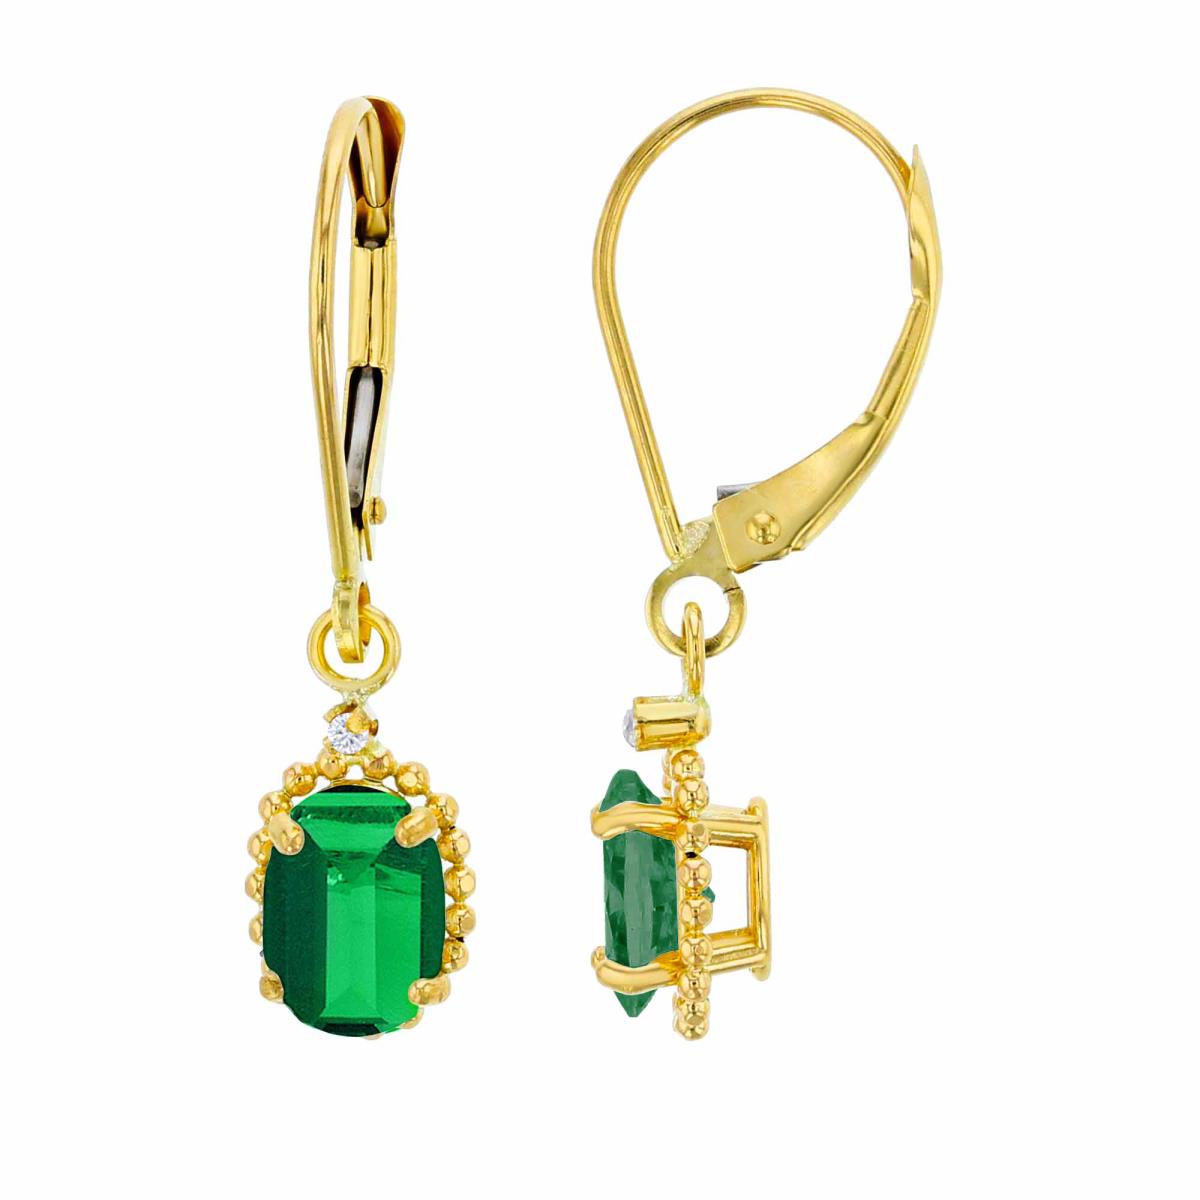 10K Yellow Gold 1.25mm Rd White Topaz & 6x4mm Ov Created Emerald Bead Frame Drop Lever-Back Earring